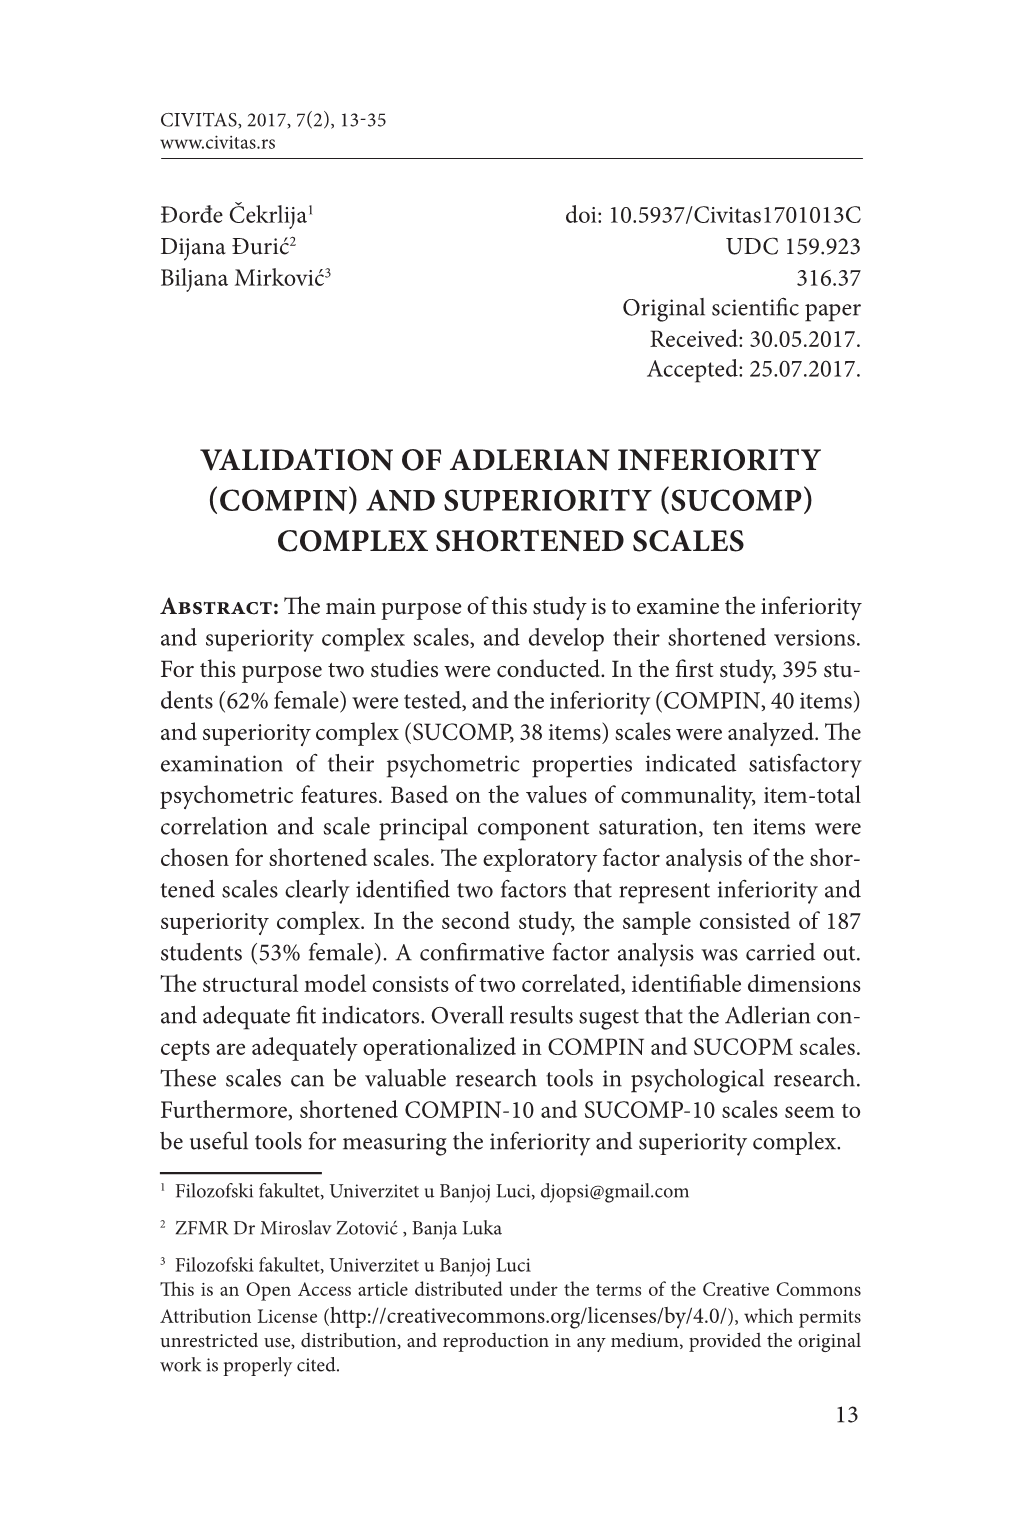 Validation of Adlerian Inferiority (Compin) and Superiority (Sucomp) Complex Shortened Scales